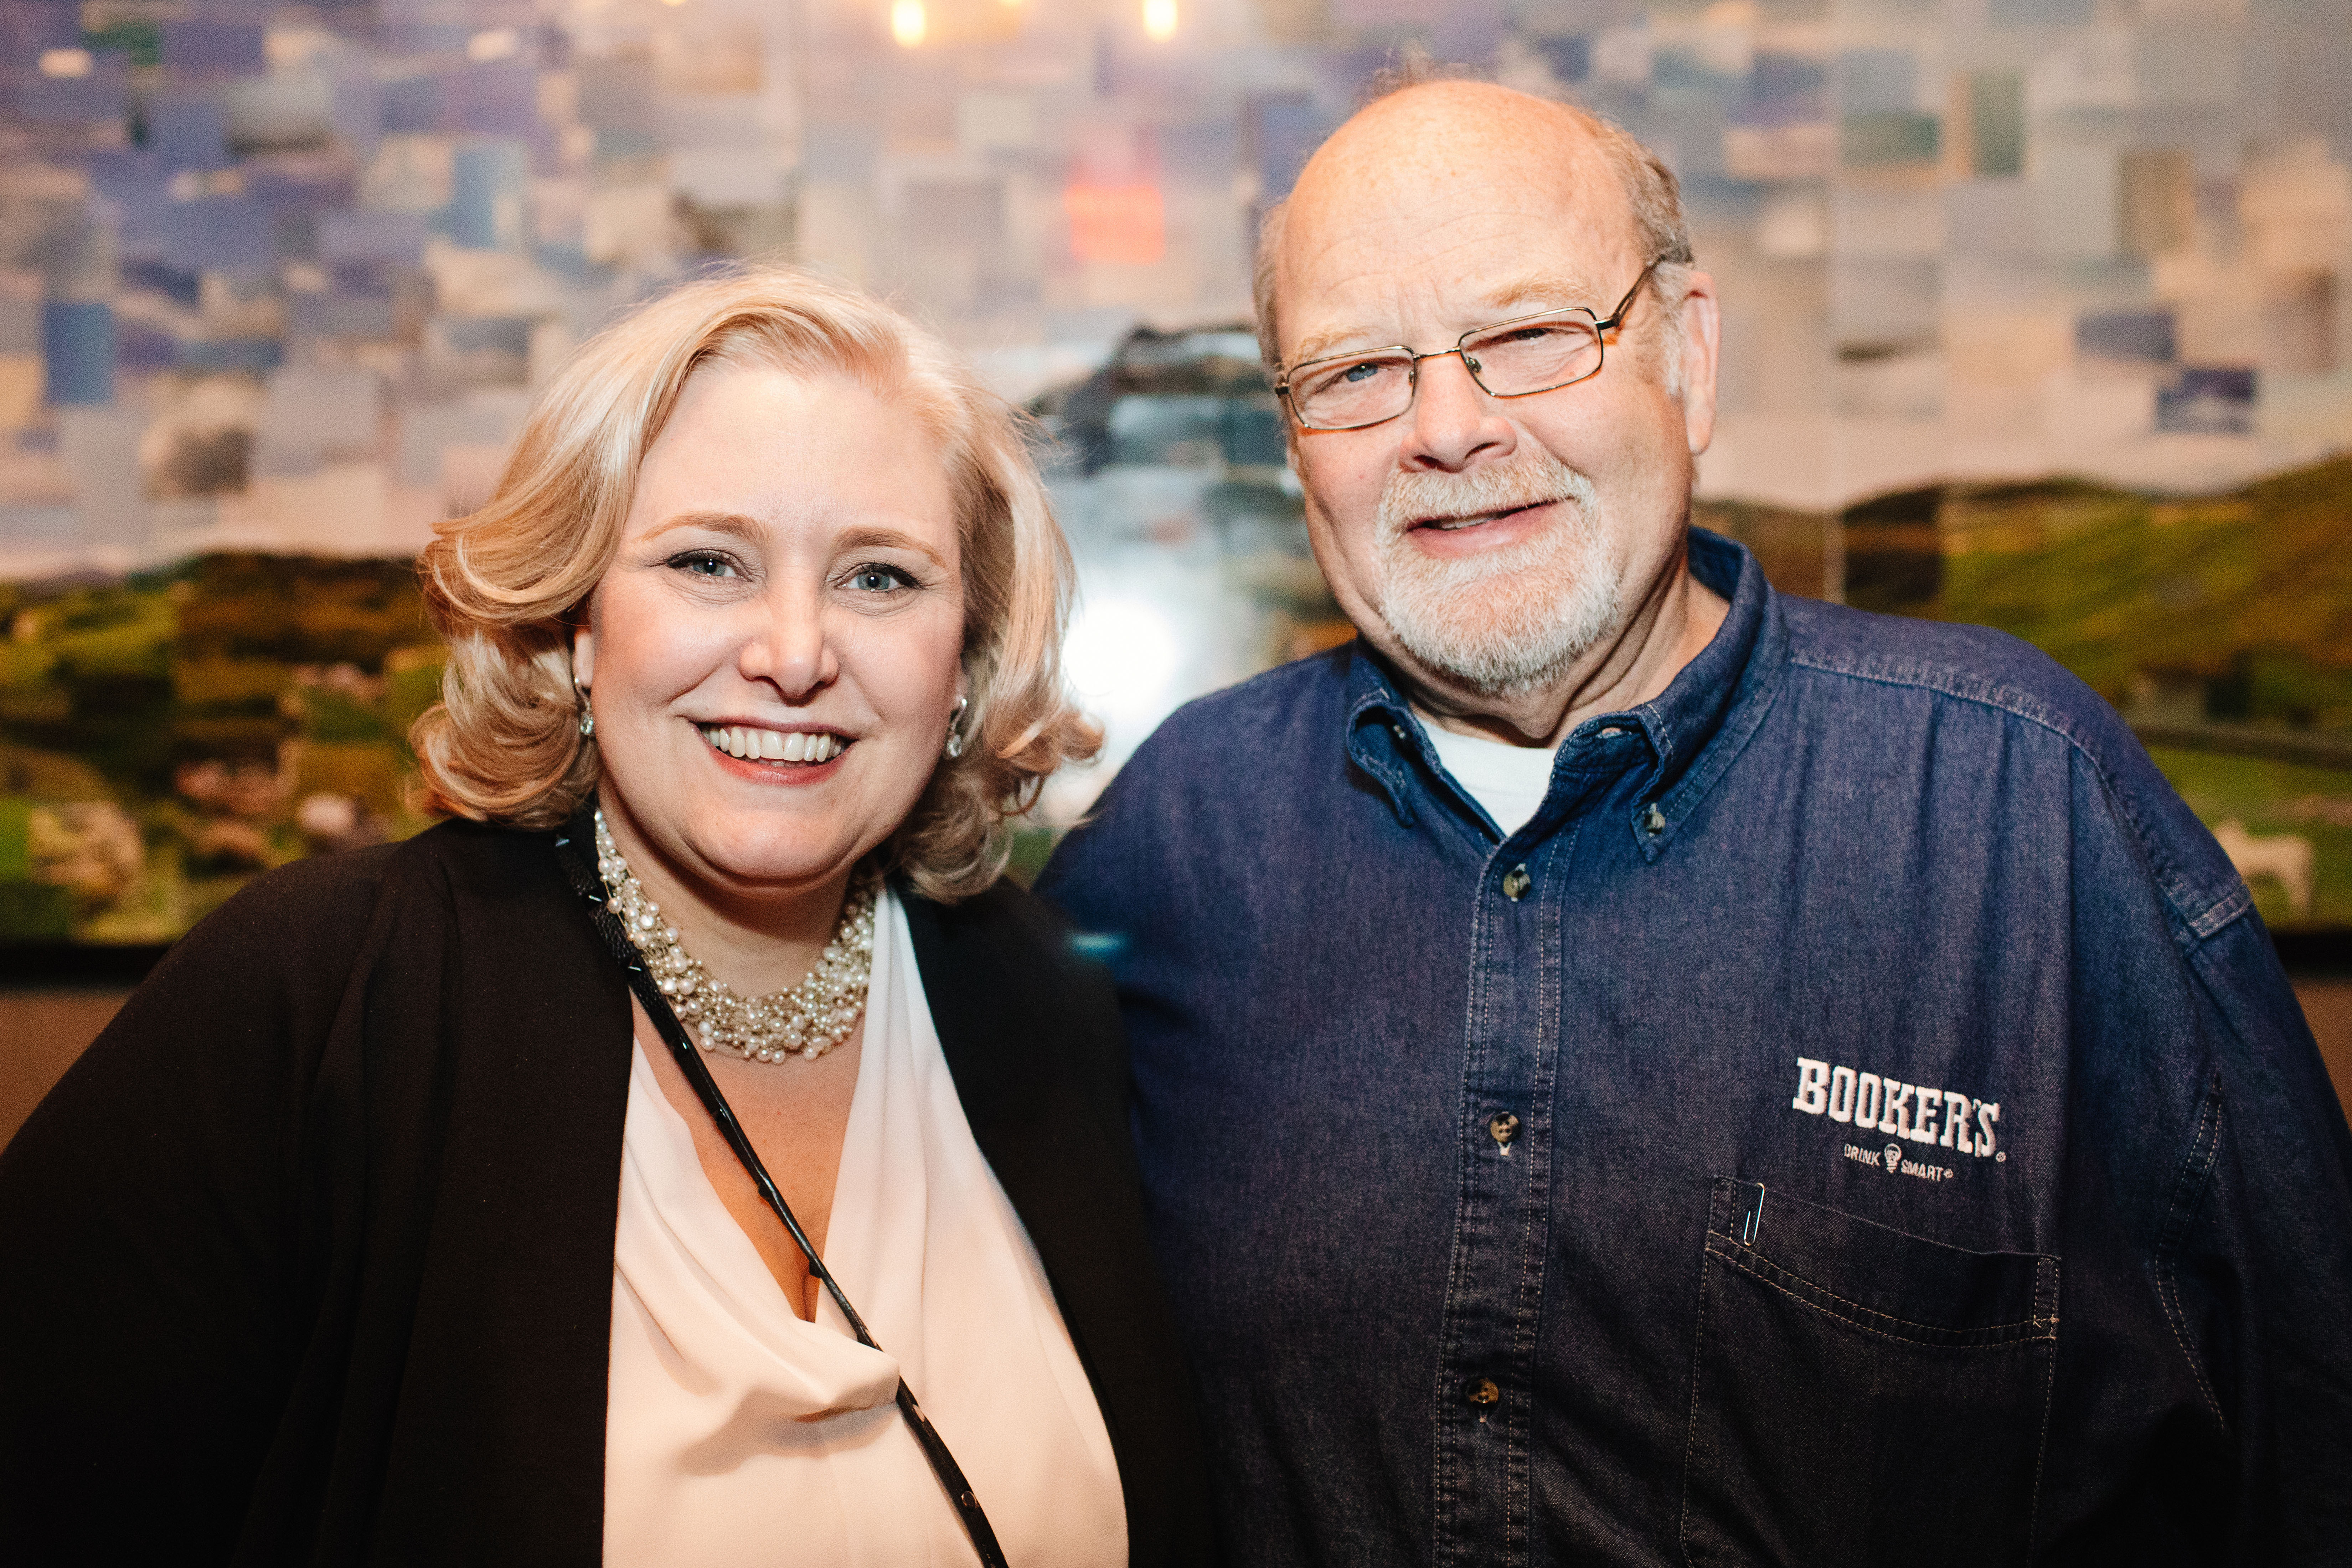 Kathleen DiBenedetto (left) and Fred Noe (right)